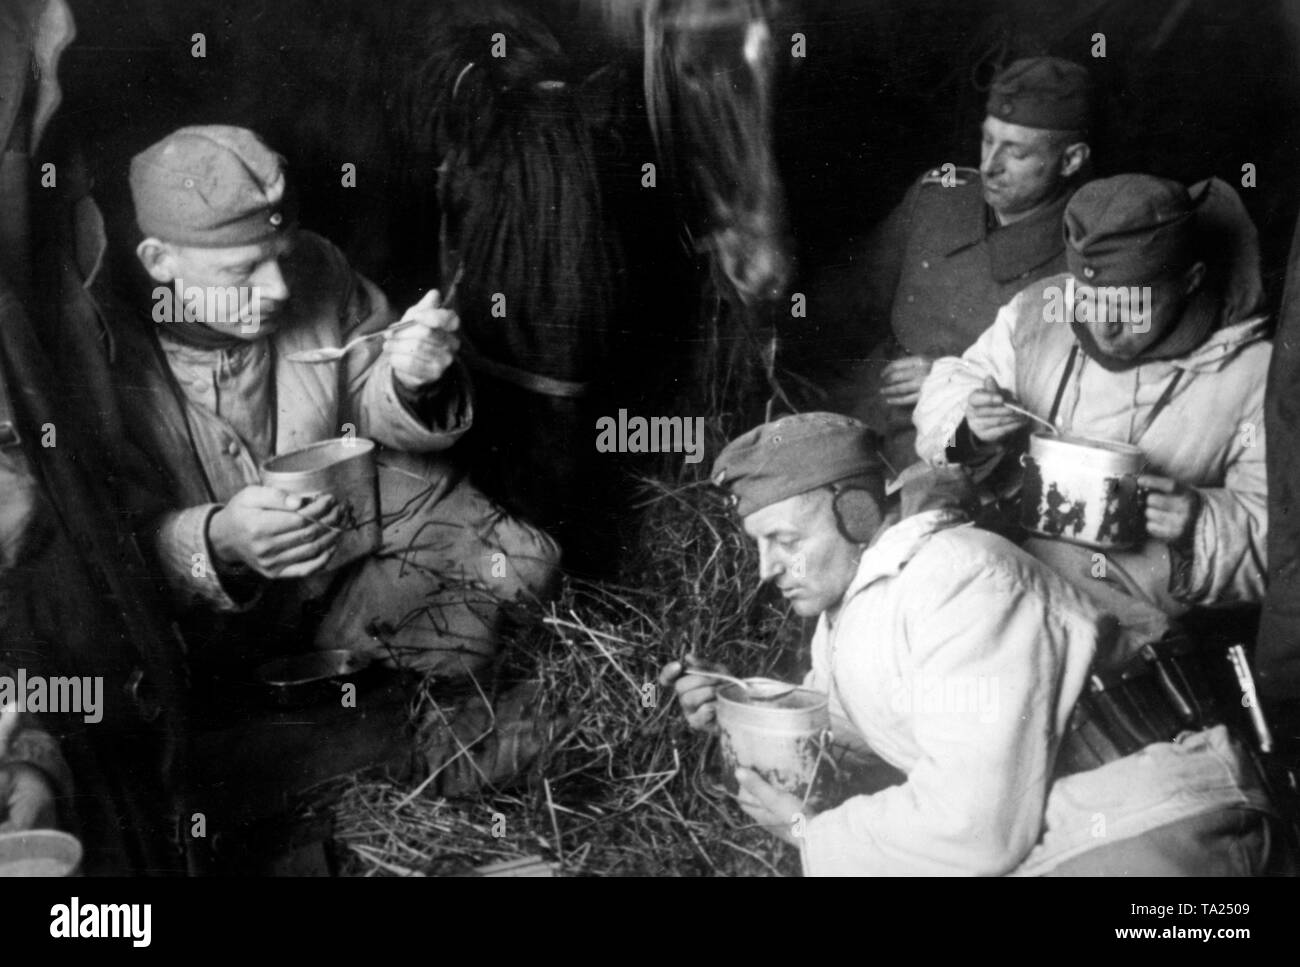 Soldiers eat soup in a railroad car, which carries them to the next deployment location. The same wagon will house the horses needed for further transport. They are located south of Oryol (Orel) in the eponymous oblast. Photo of the Propaganda Company (PK): war correspondent Henisch. Stock Photo